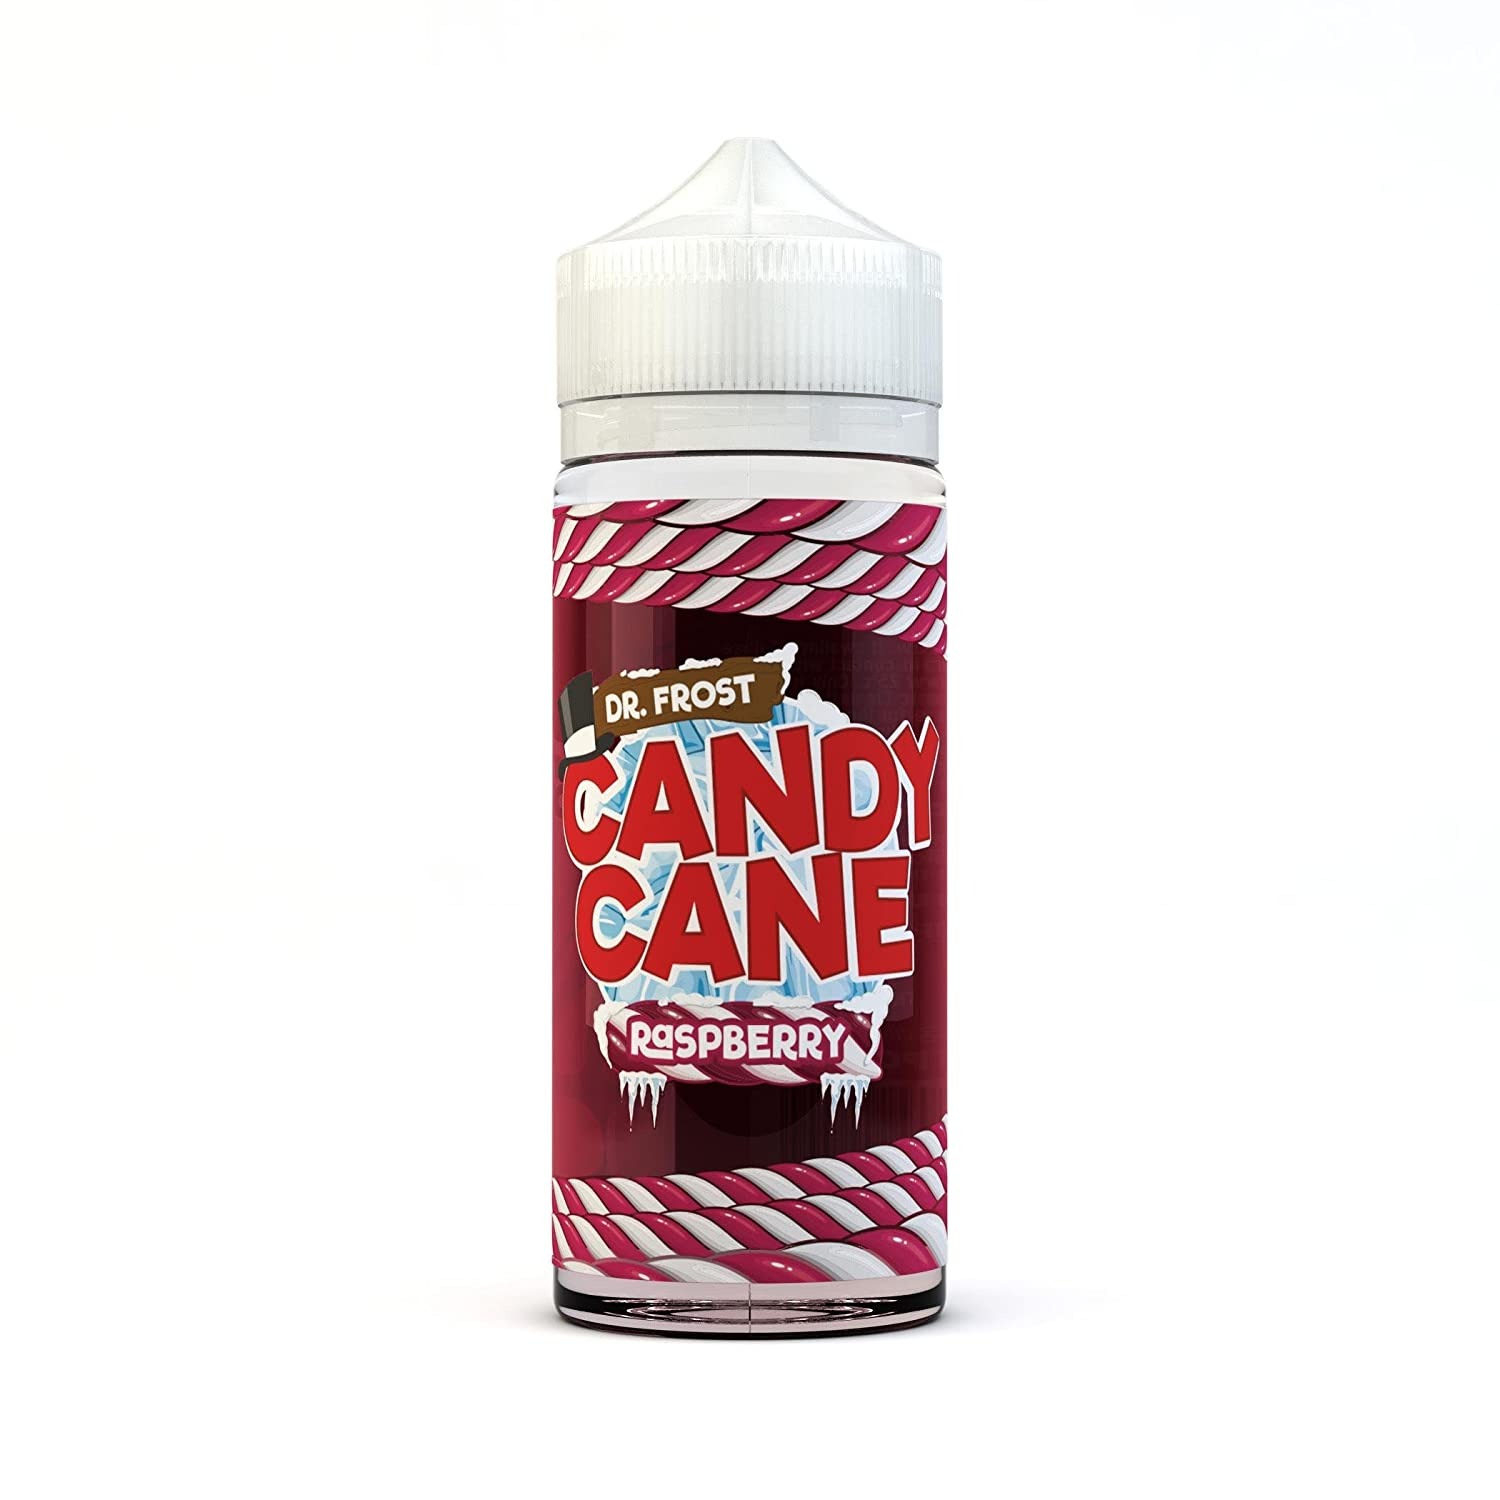 Candy Cane Raspberry By Dr Frost